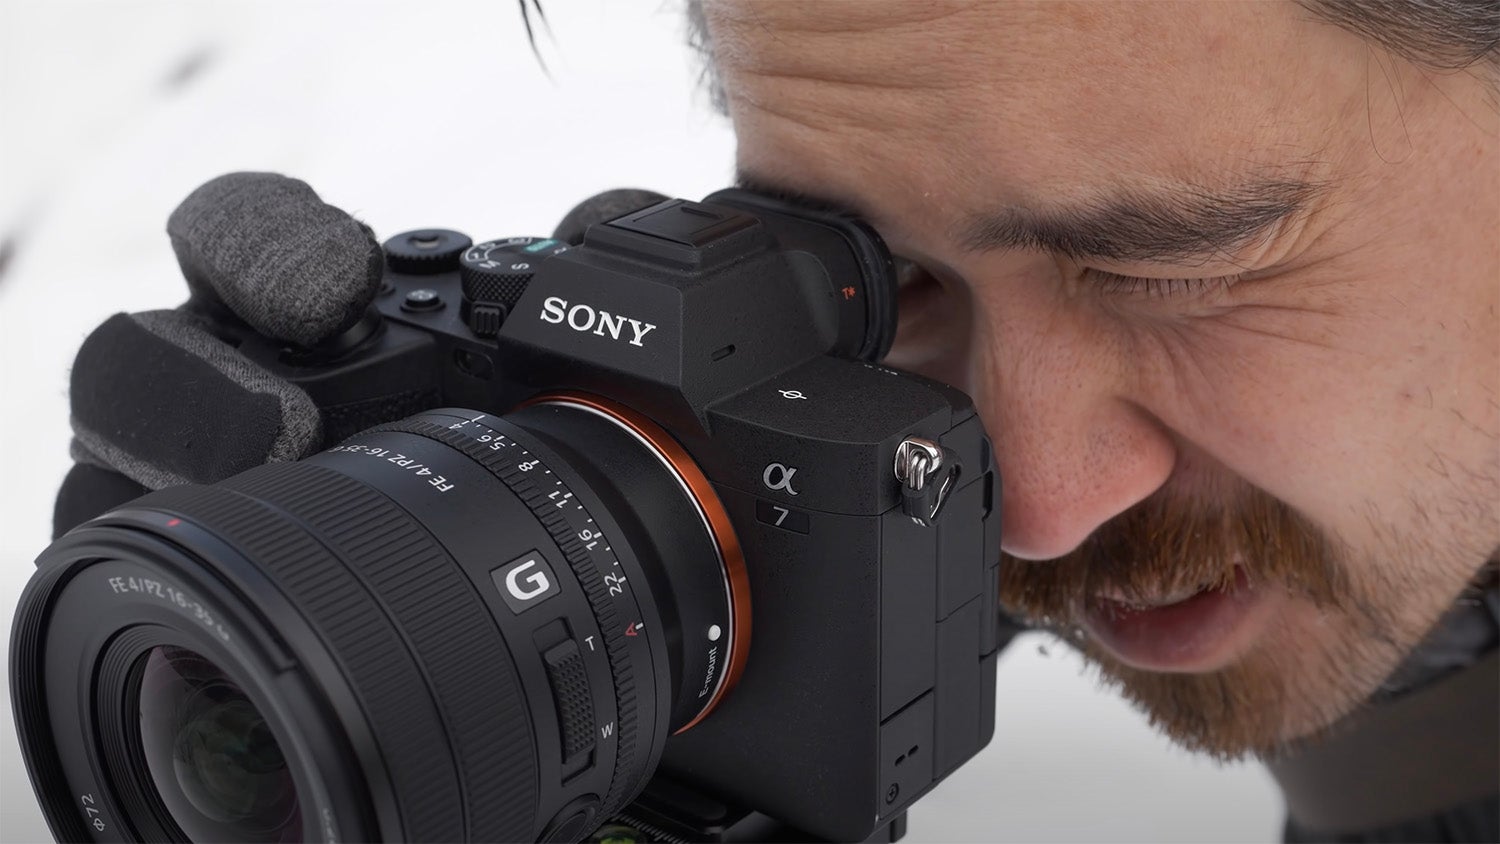 Review Roundup: The New Sony 16-35mm f/4 G PZ Lens | Sony | Alpha